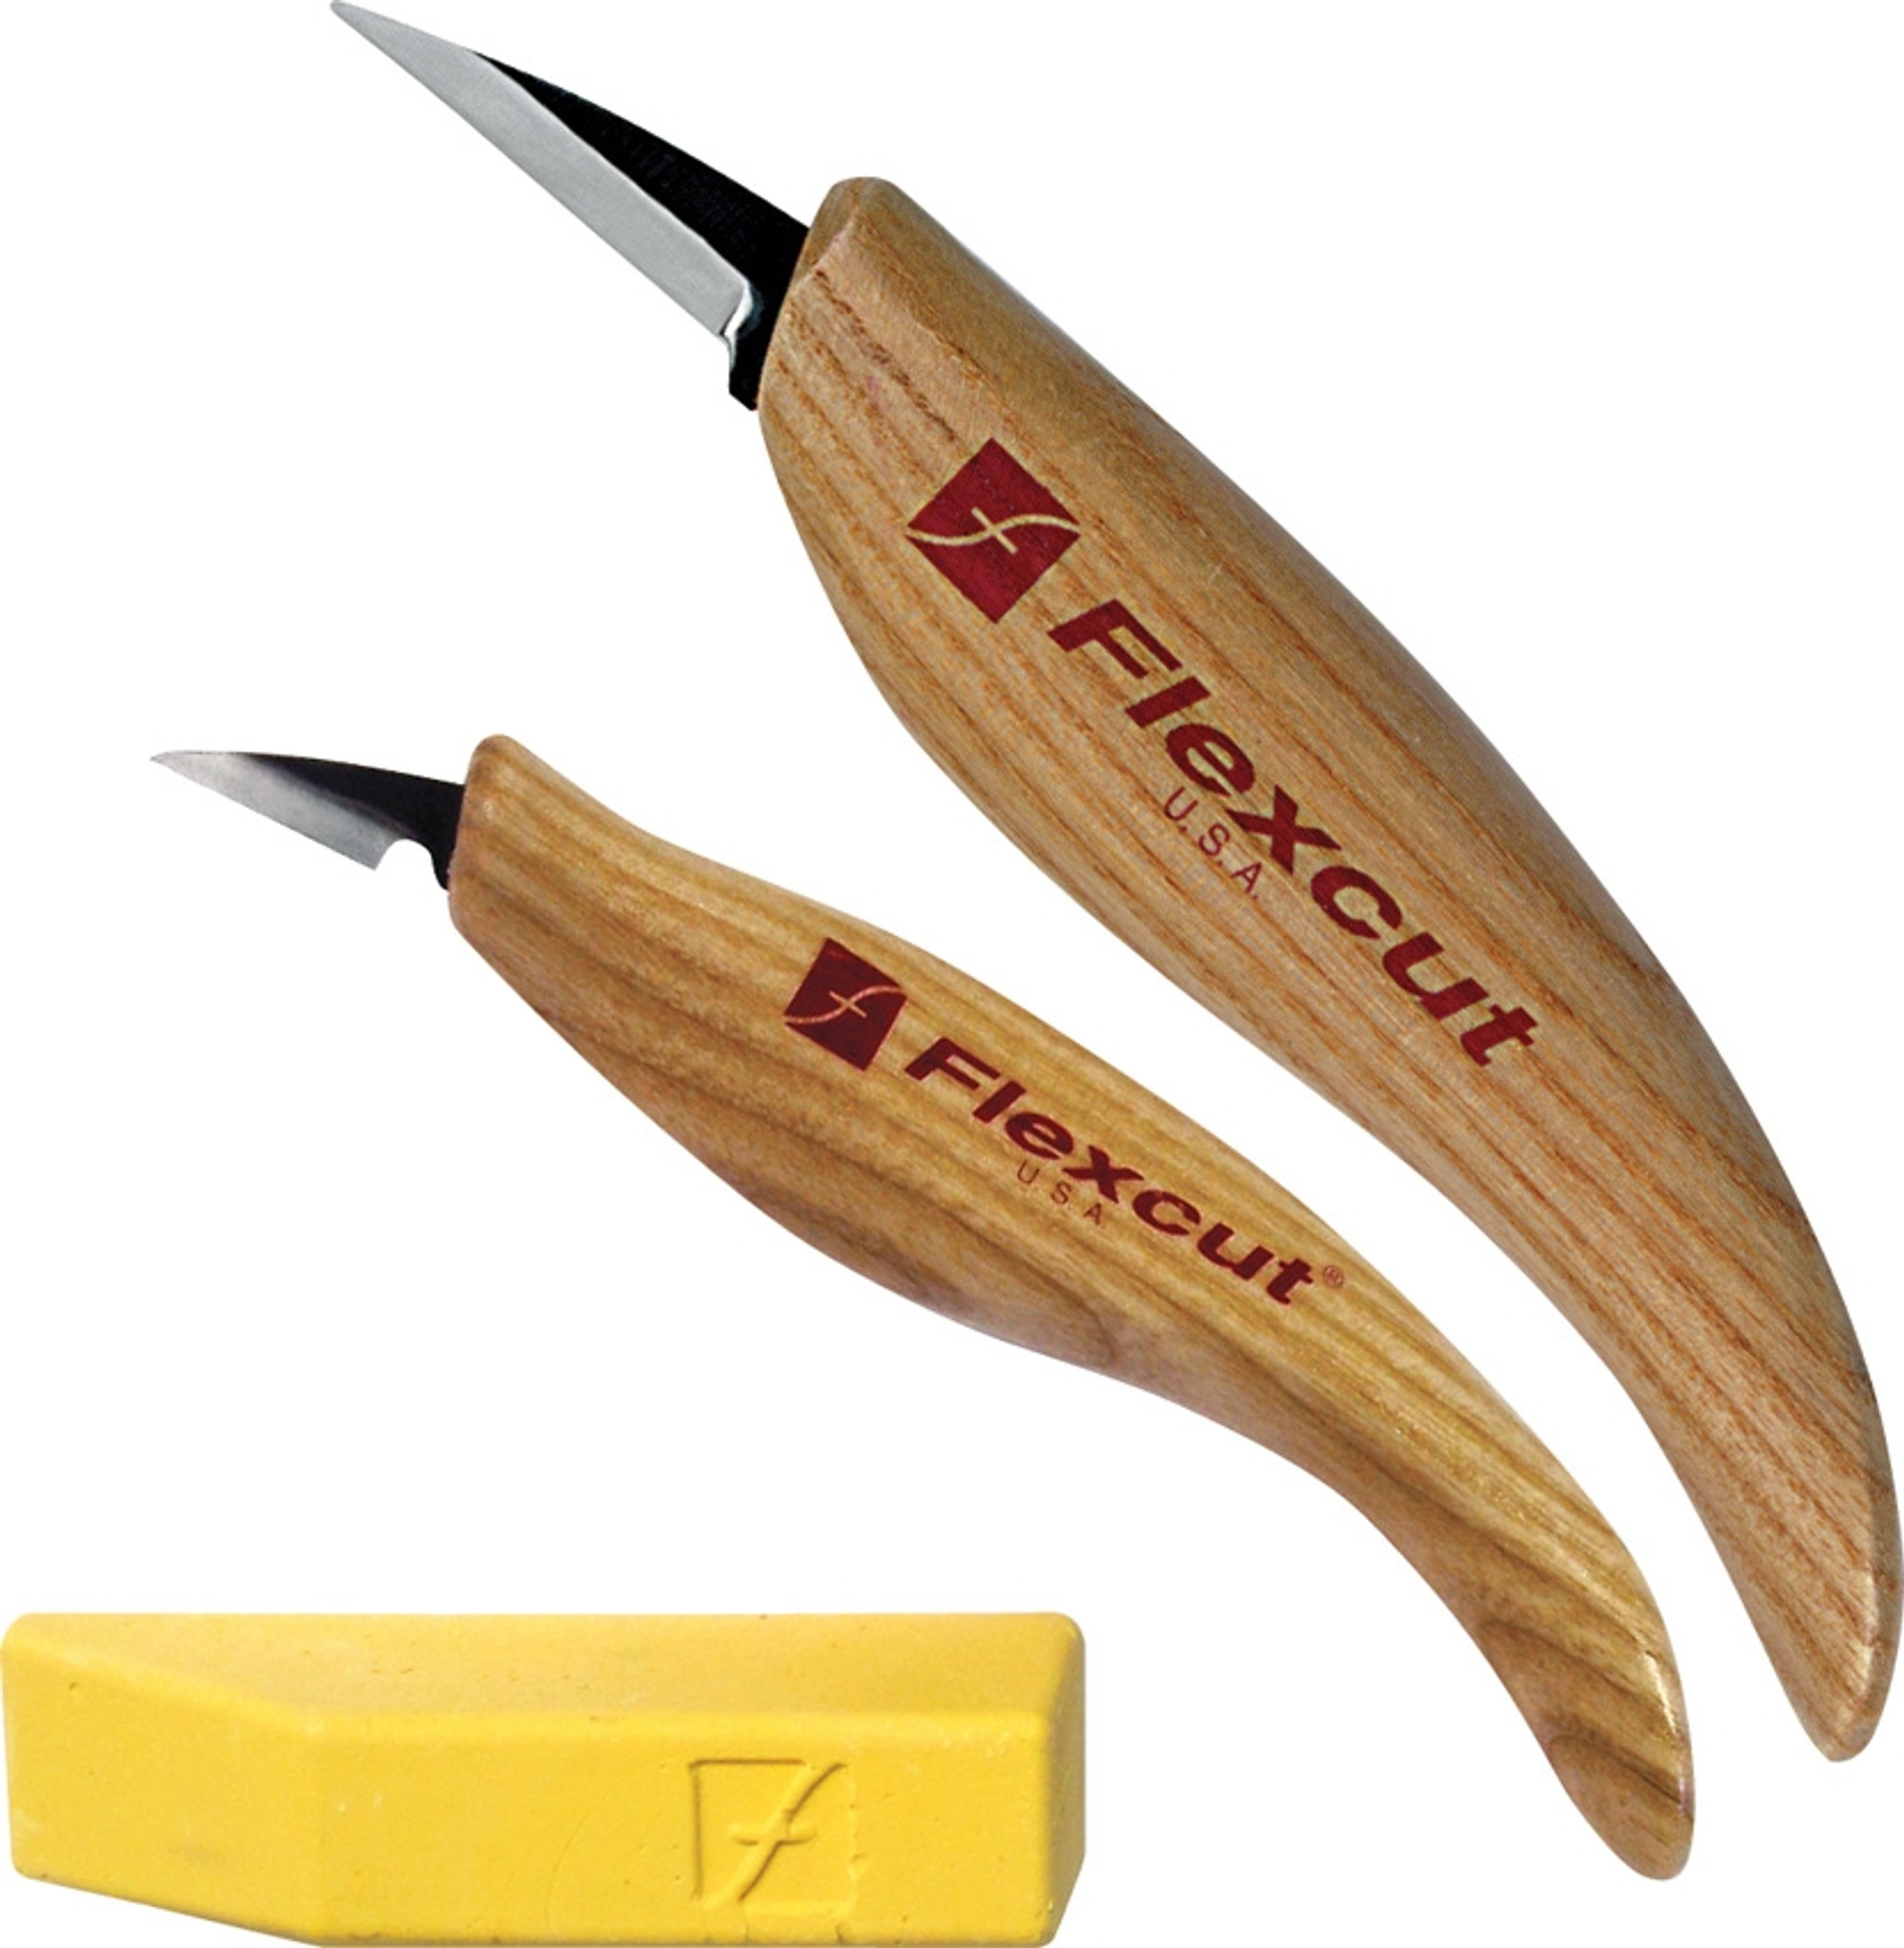 Whittlers 2-Piece Knife Kit